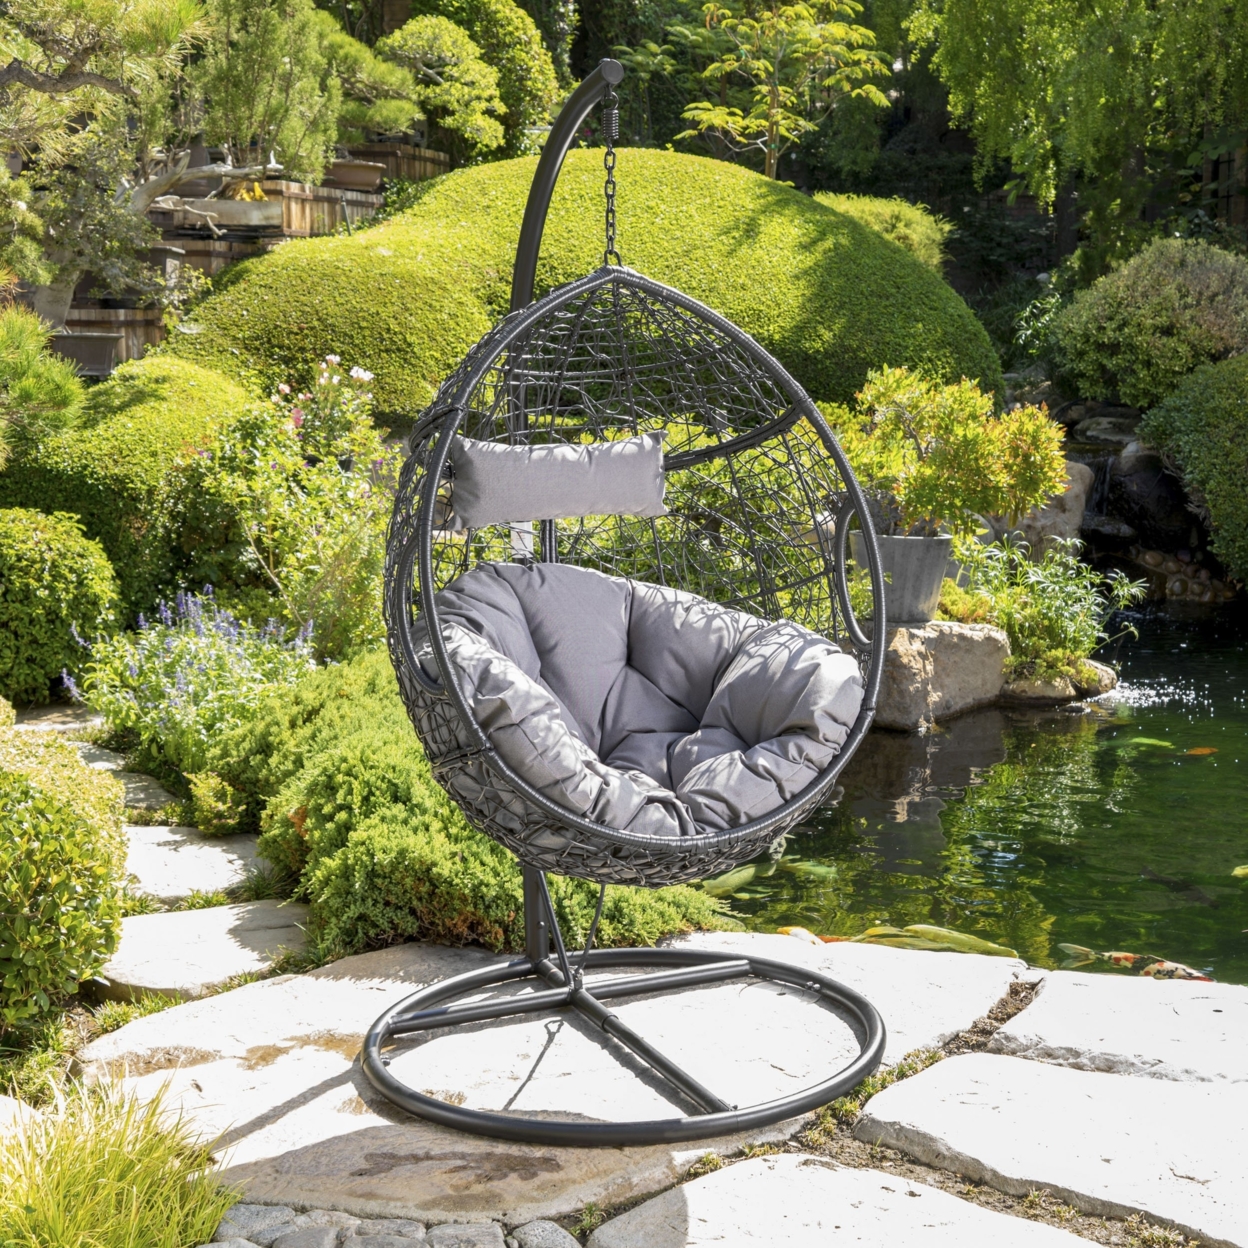 Kyle Outdoor Wicker Hanging Basket Chair With Water Resistant Cushions And Base - Black/Gray